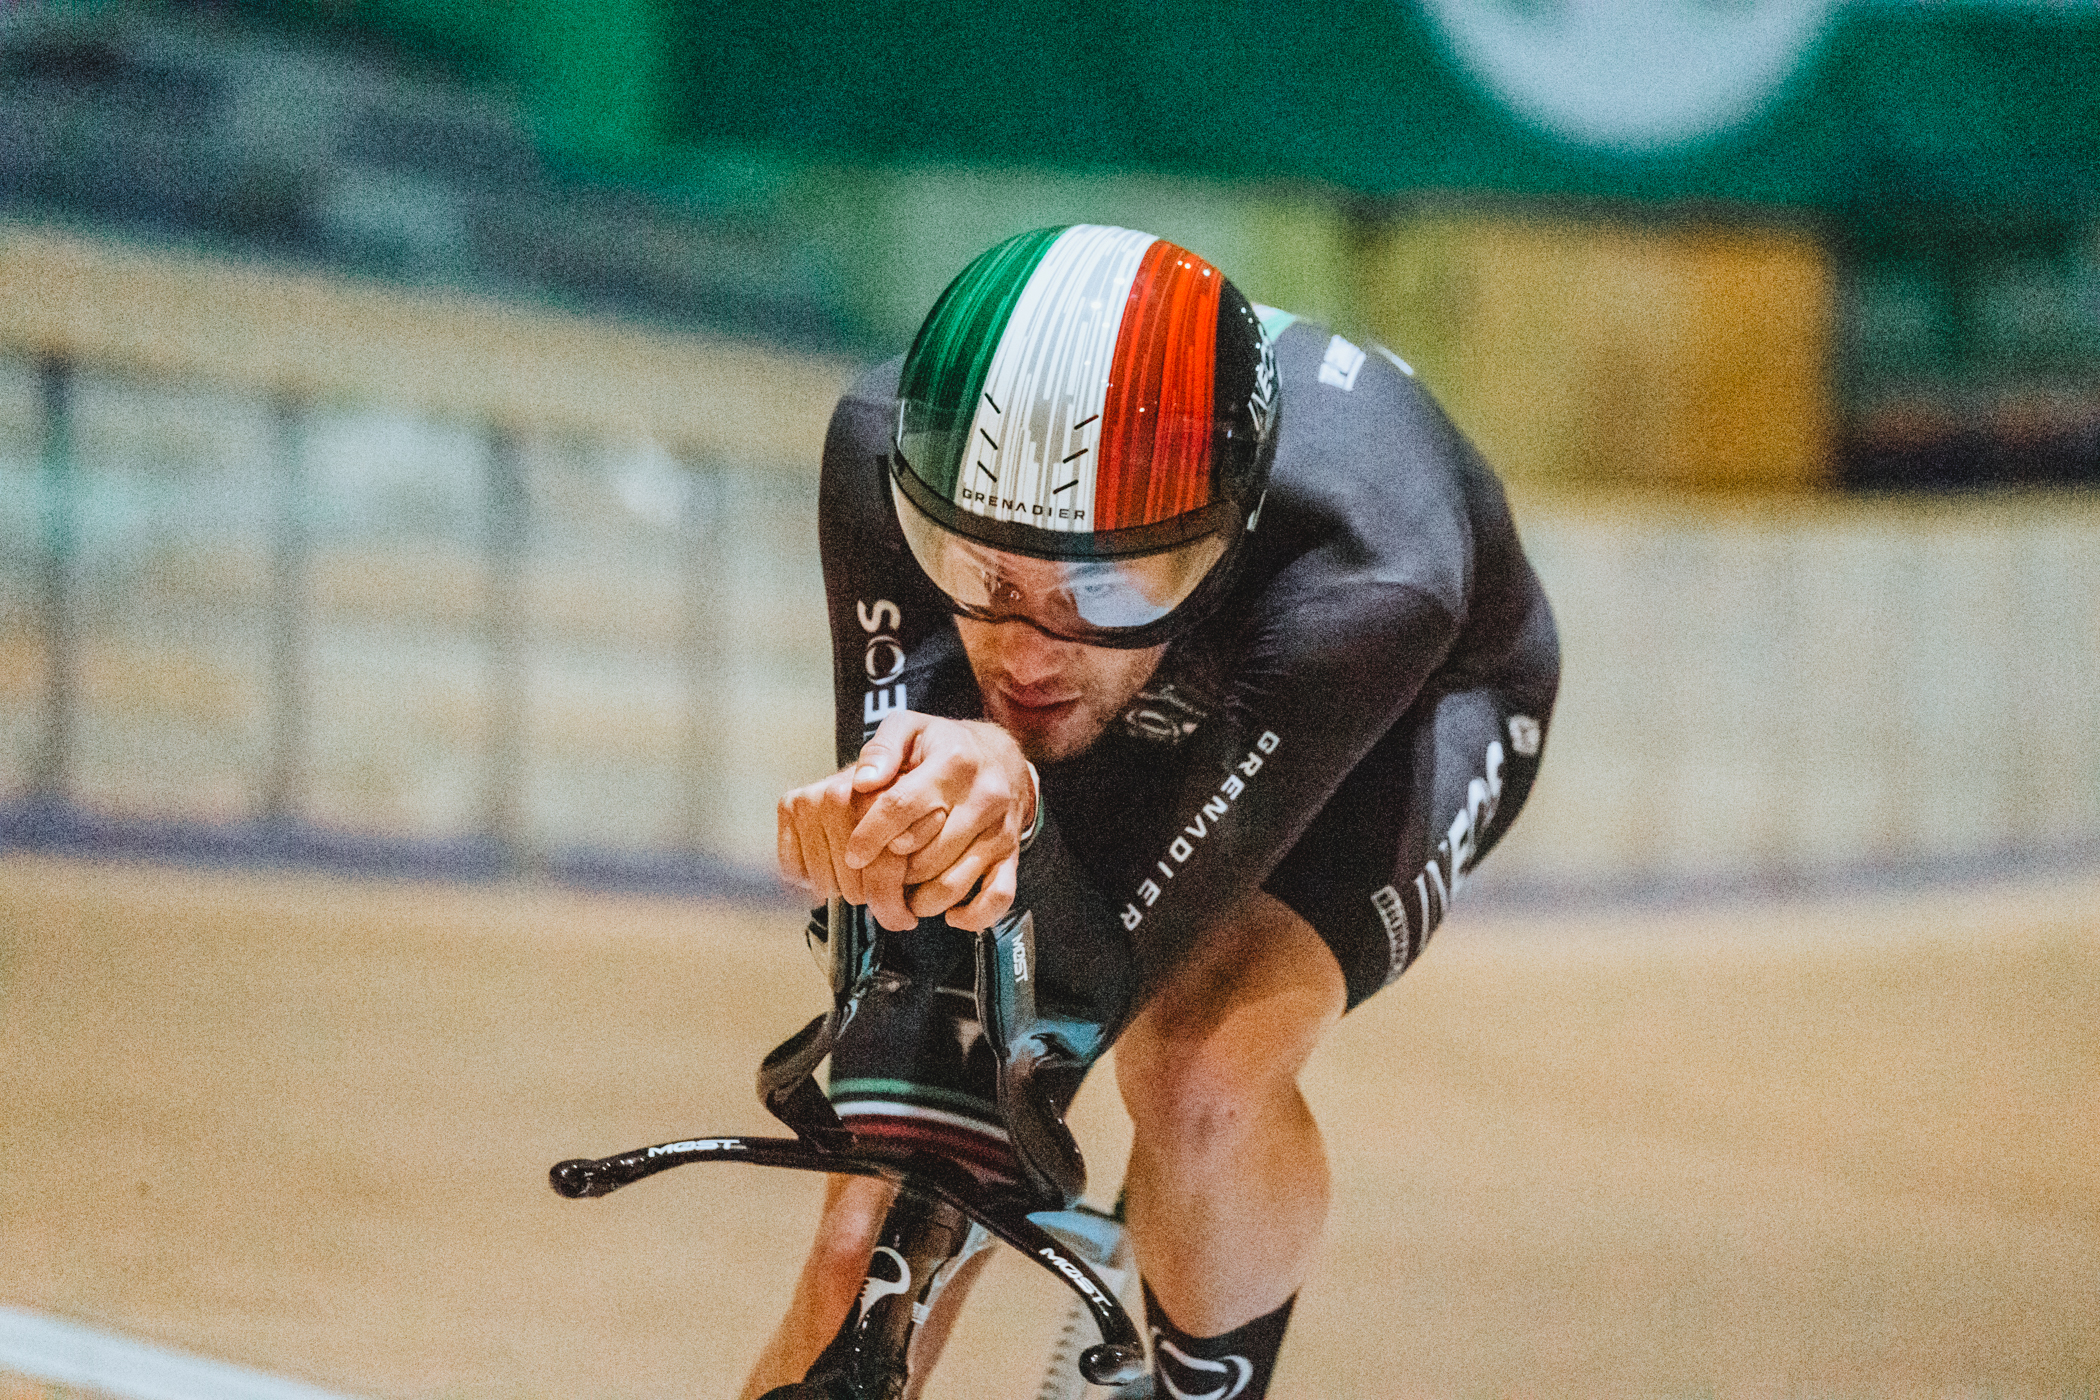 Filippo Ganna and the hour record: the Verbania native's admission